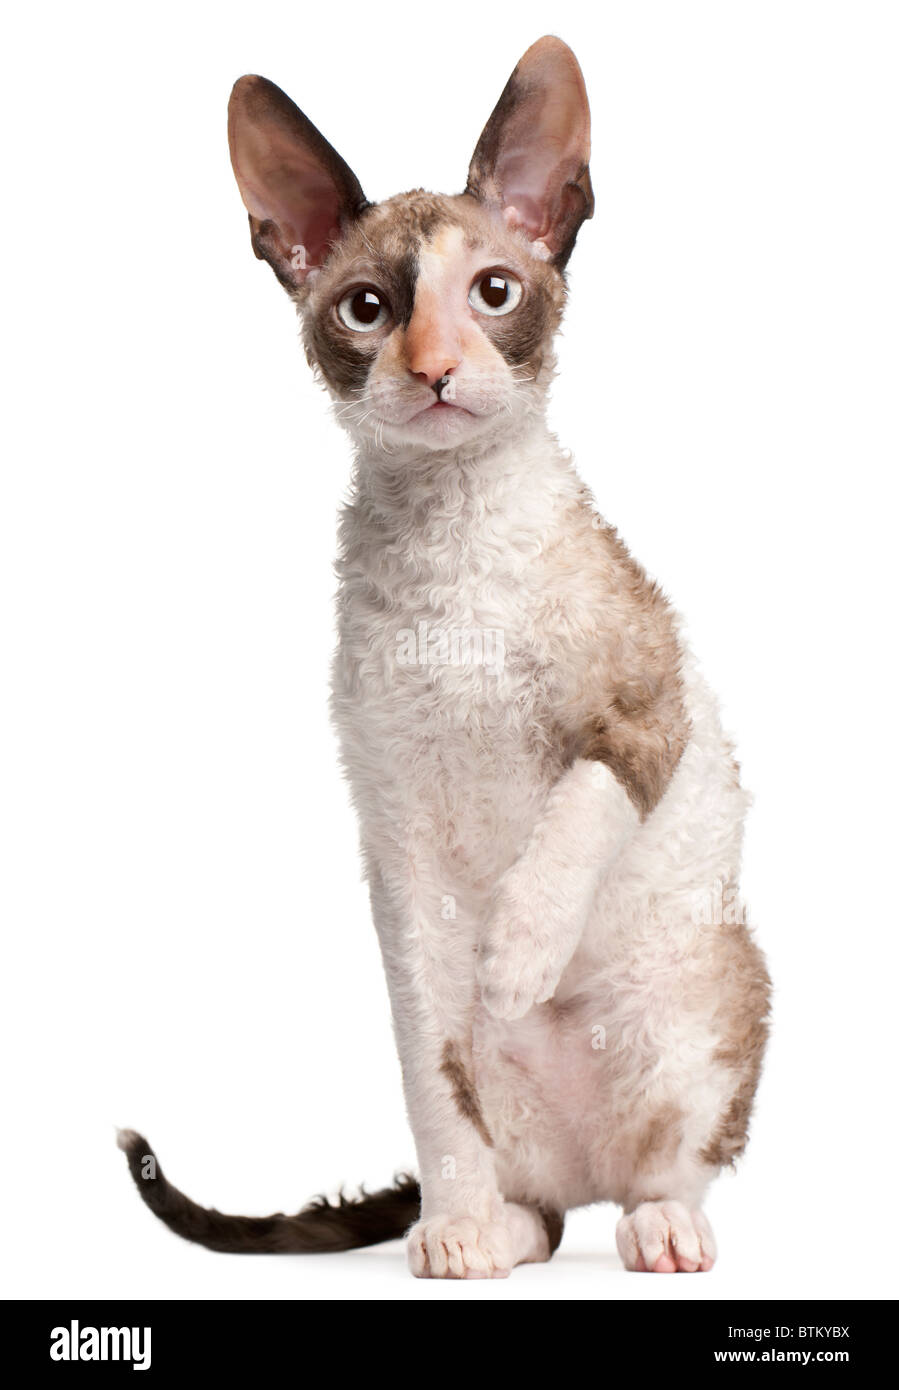 Cornish Rex kitten, 4 months old, sitting in front of white background Stock Photo